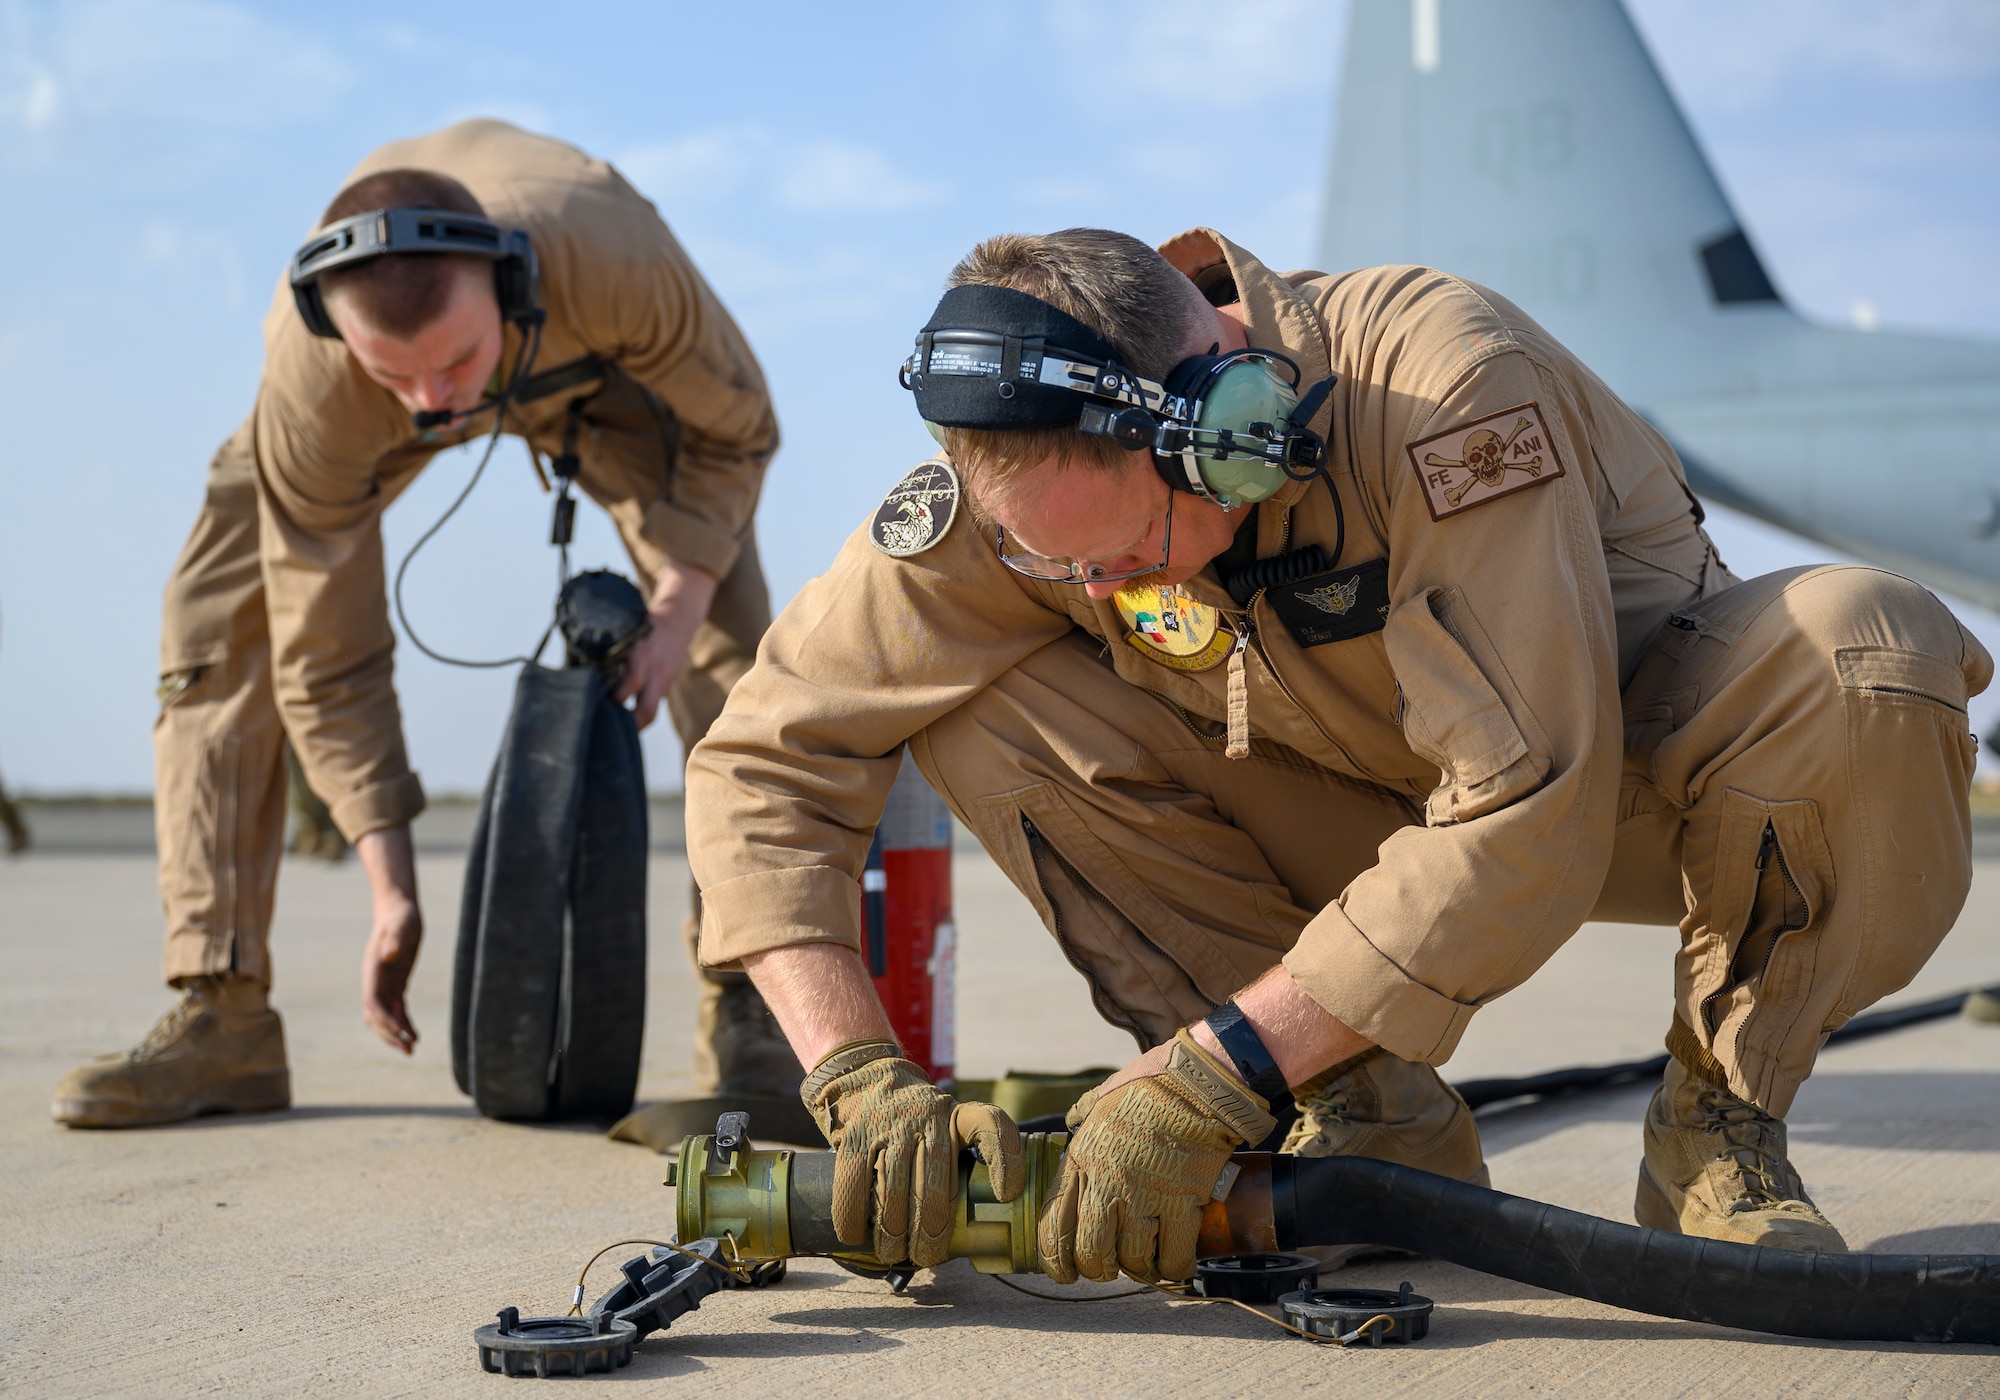 U.S. Marines with Marine Aerial Refueler Transport Squadron 352, assigned to Special Purpose Marine Air-Ground Task Force – Crisis Response – Central Command, connect a fuel hose for a “hot pit” aircraft-to-aircraft refueling during a counter unmanned aerial system integration mission with joint and Royal Saudi aircraft at a forward location in the Kingdom of Saudi Arabia, June 30, 2021. U.S. Air Forces Central aircraft regularly work with coalition and partner nations to test their collective counter-UAS capabilities to ensure the security and stability of regional airspace. (U.S. Air Force photo by Senior Airman Samuel Earick)